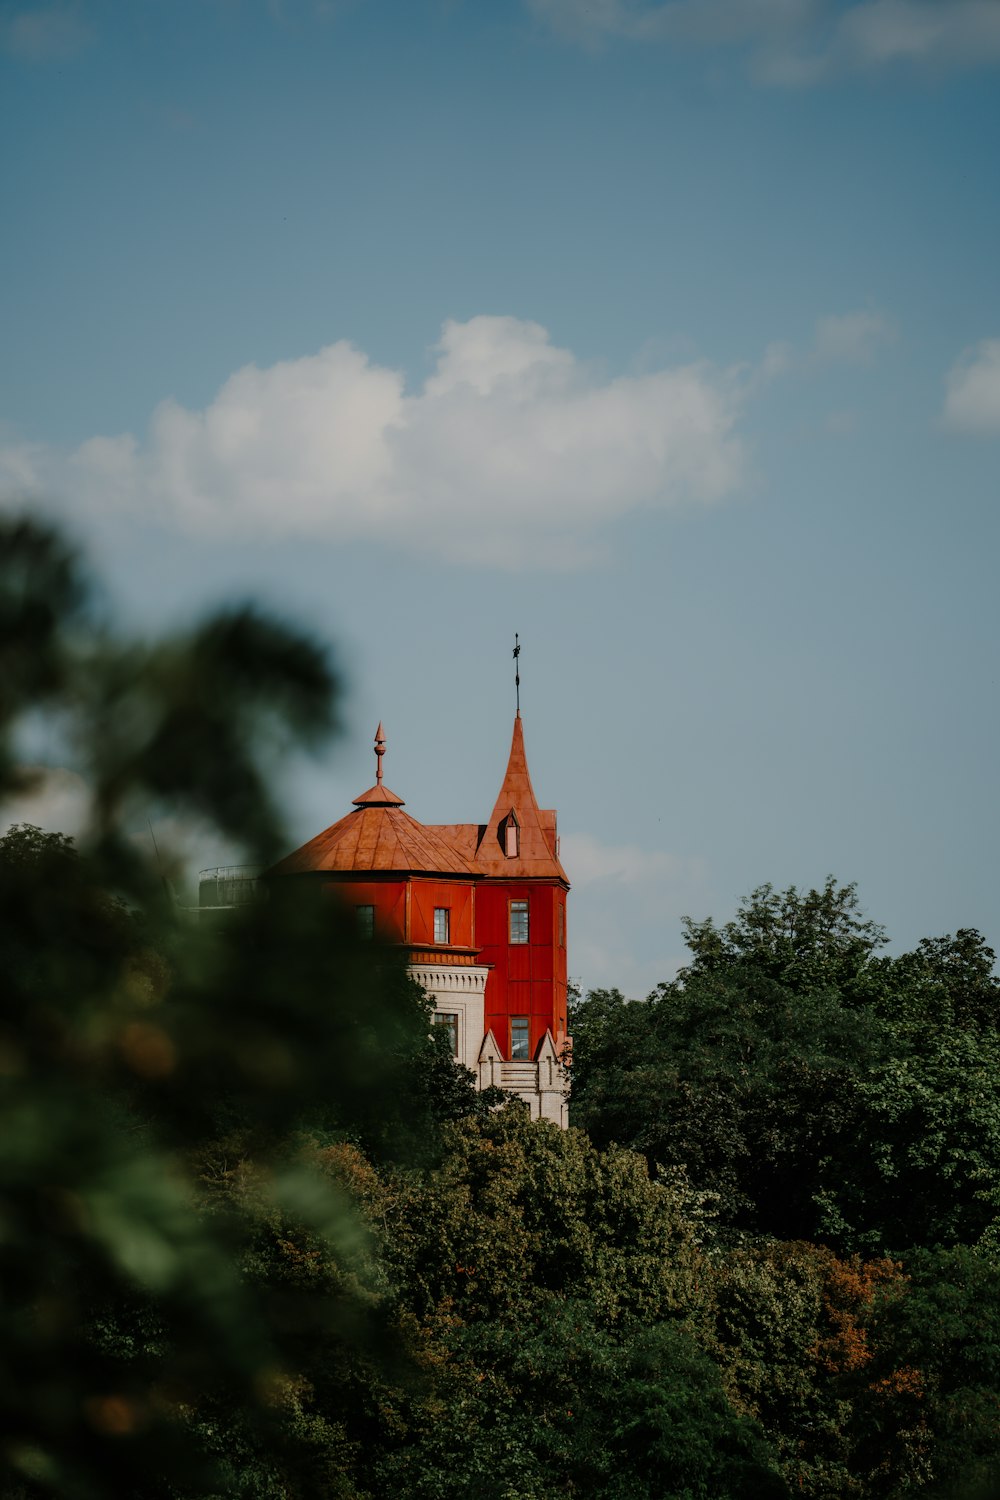 a red building with a steeple surrounded by trees